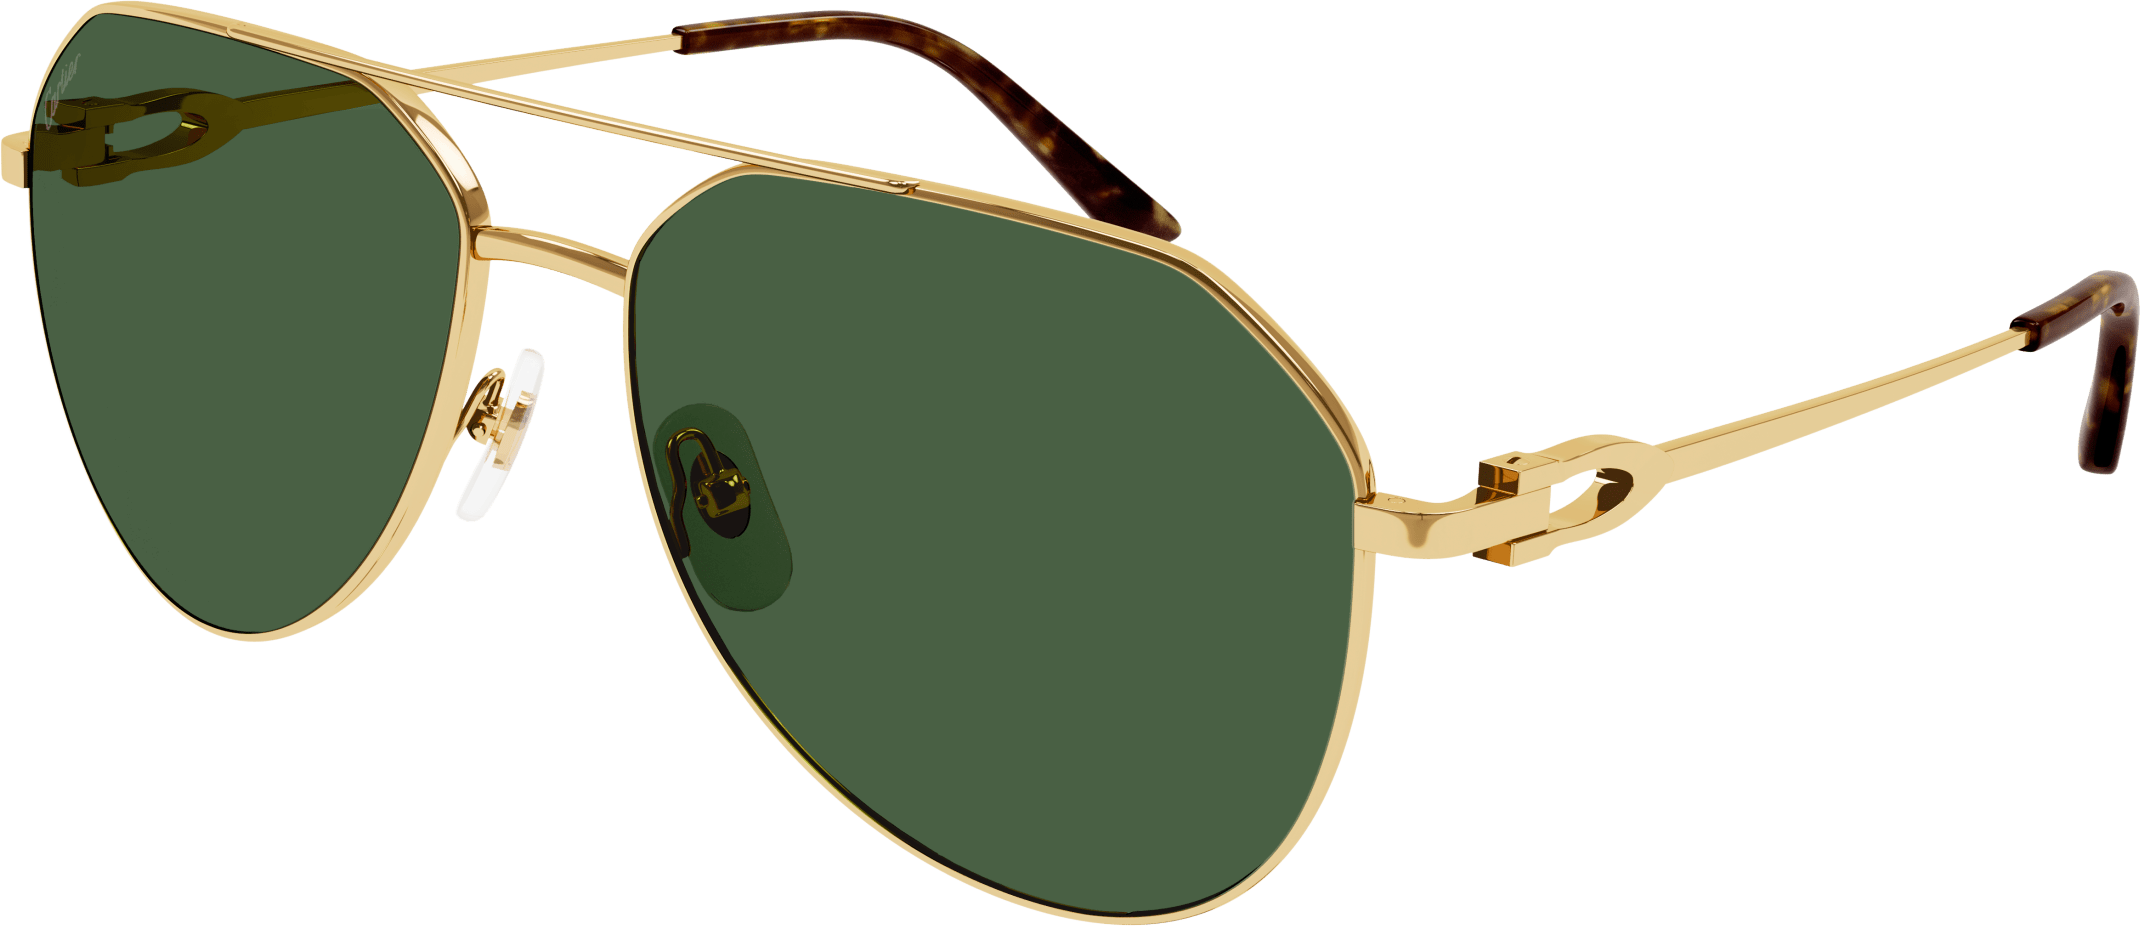 Color_CT0364S-002 - GOLD - GREEN - AR (ANTI REFLECTIVE) - POLARIZED